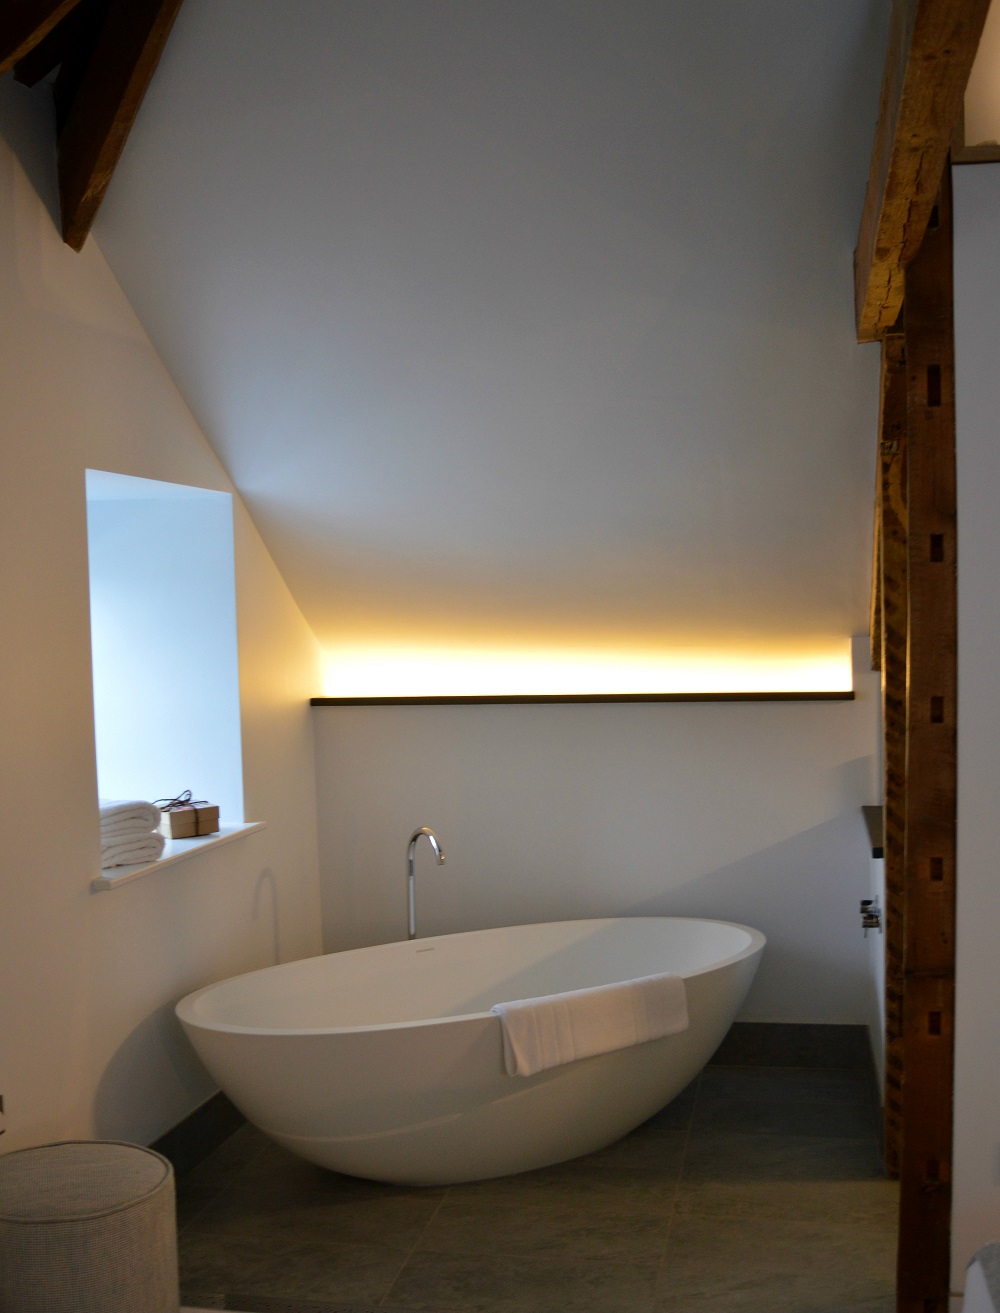 Review of Chapel House, Penzance, Cornwall